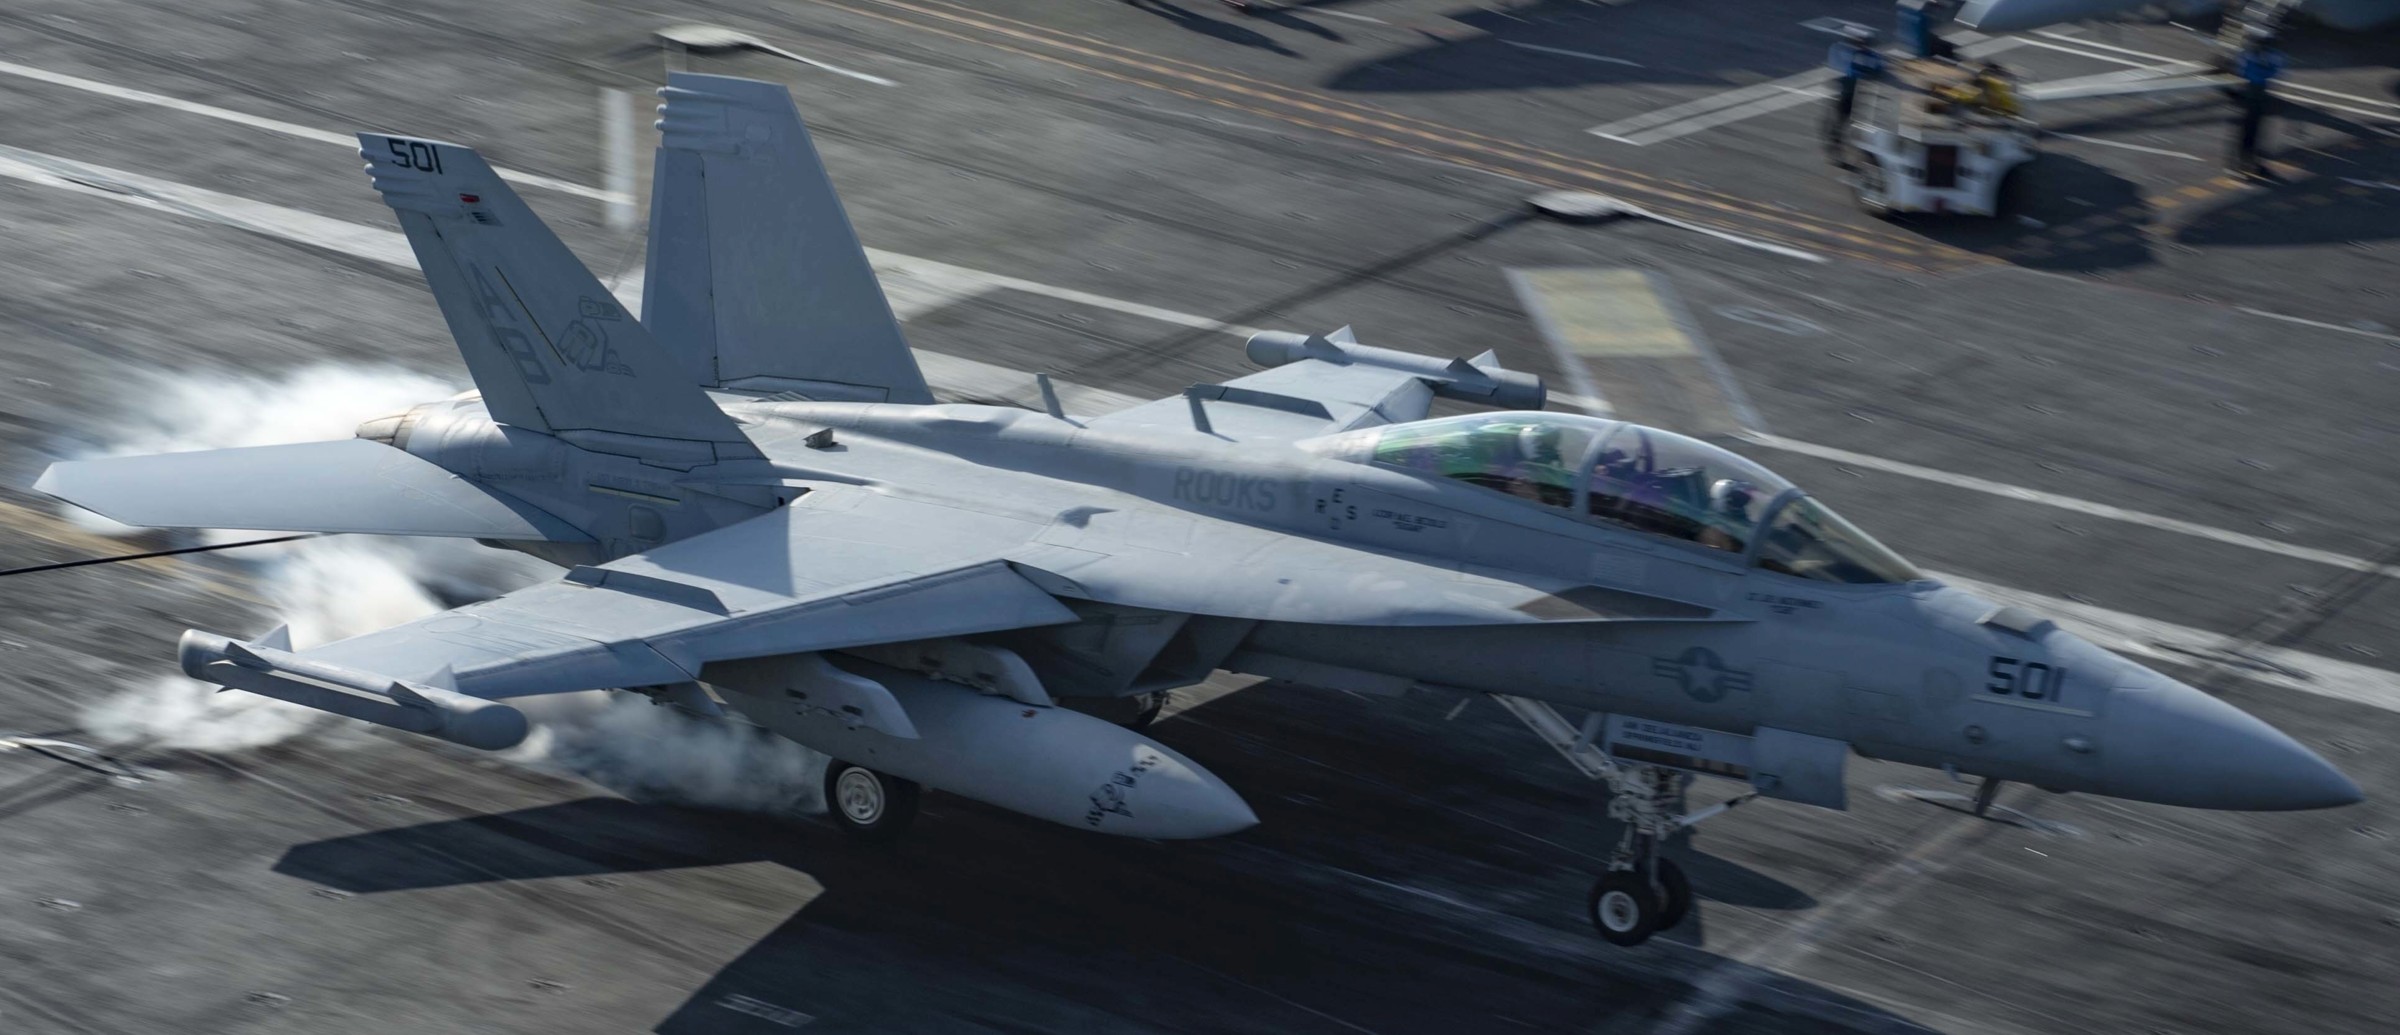 vaq-137 rooks electronic attack squadron us navy ea-18g growler carrier air wing cvw-1 uss harry s. truman cvn-75 84